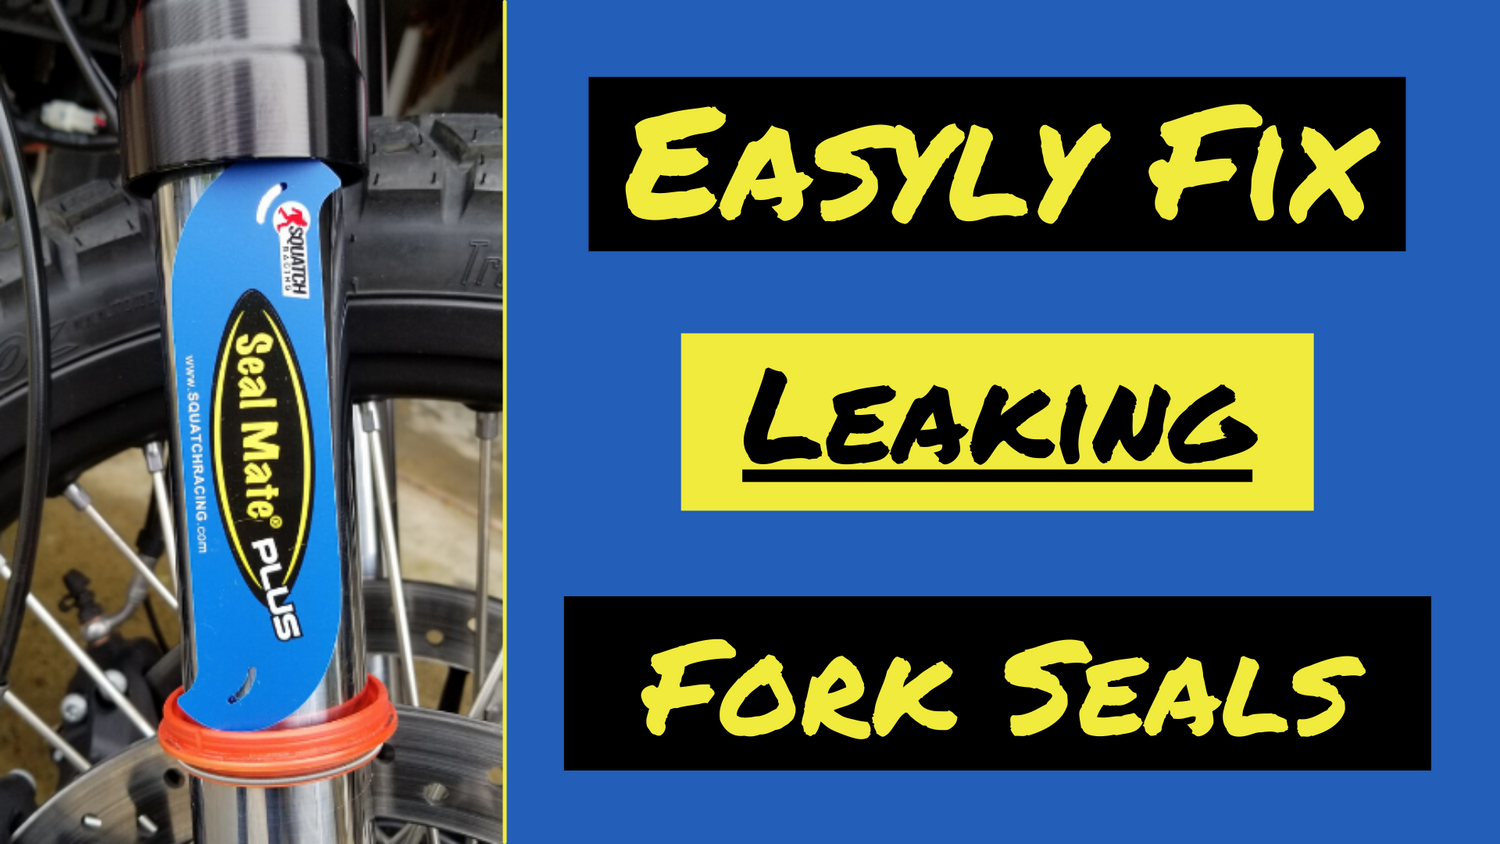 Seal Mate Plus Will Fix Leaking Fork Seals